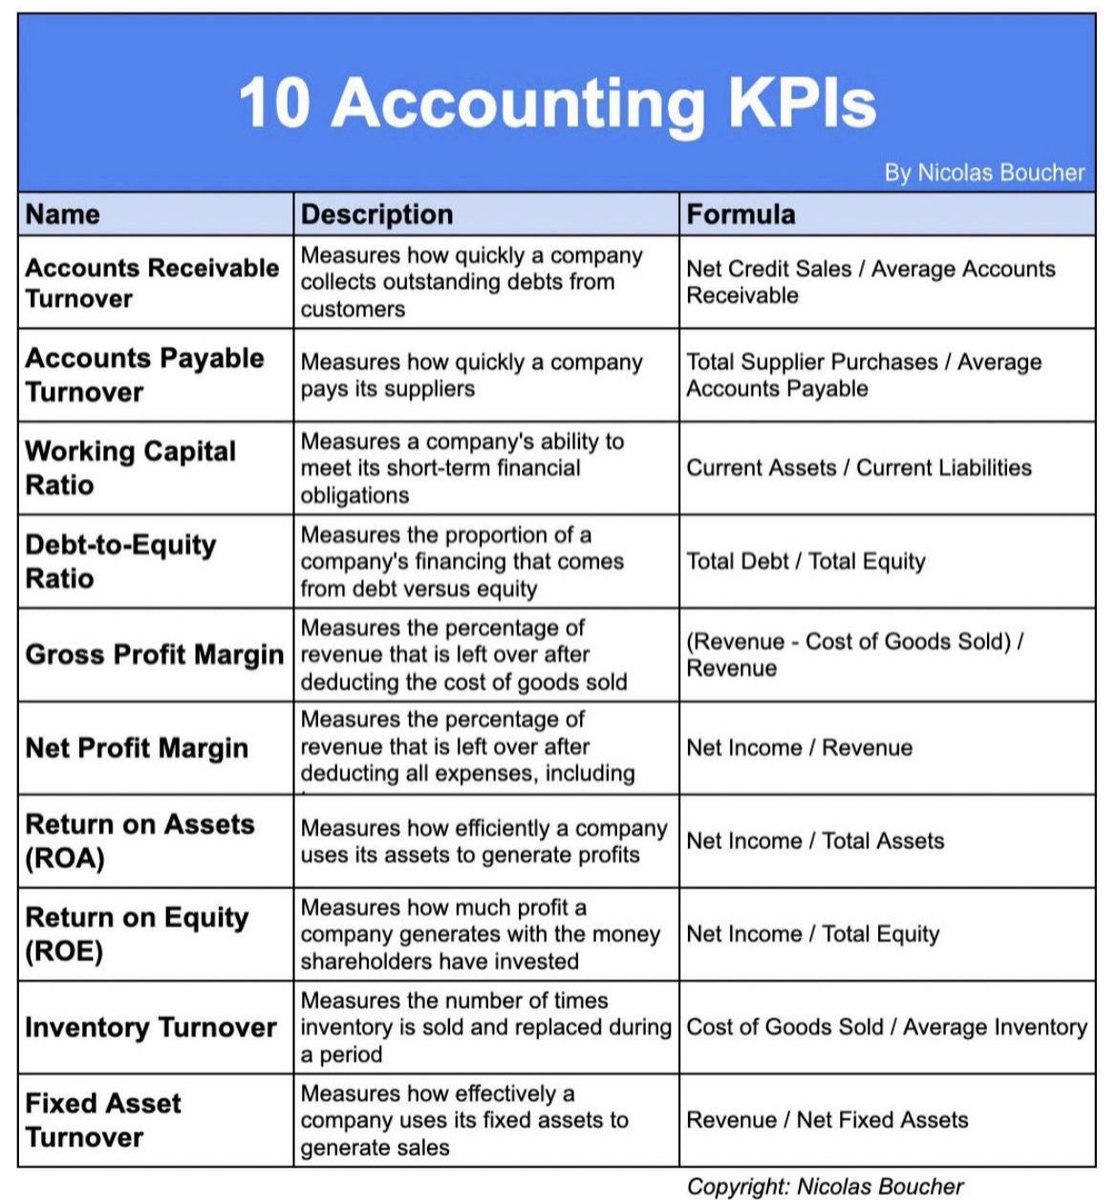 10 Accounting KPIs you must know